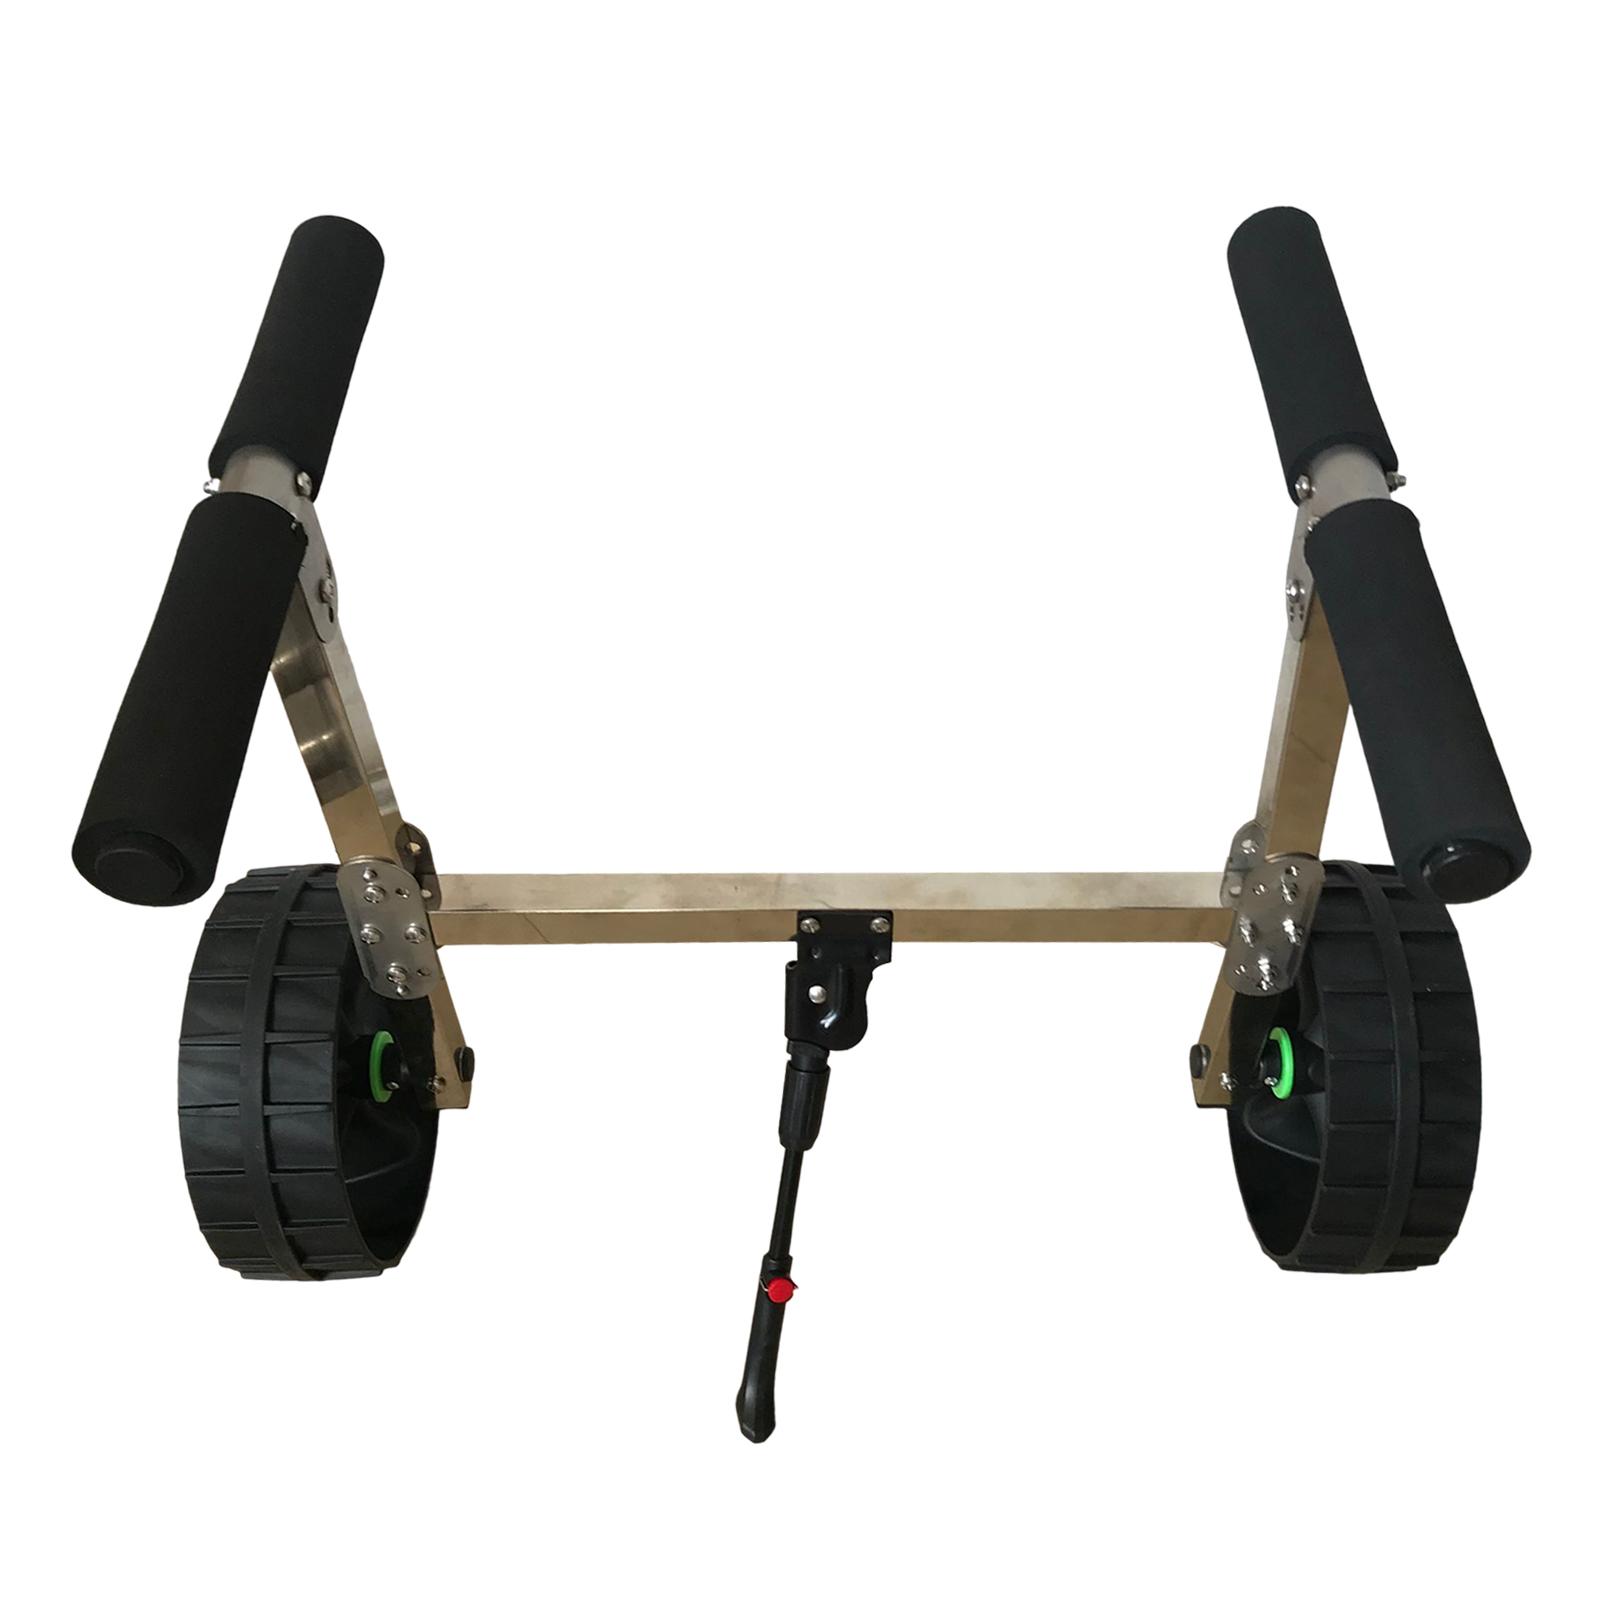 Kayak Wheels Trolley Folding with Support Stand Hauler Canoe Dolly Kayak Carrier